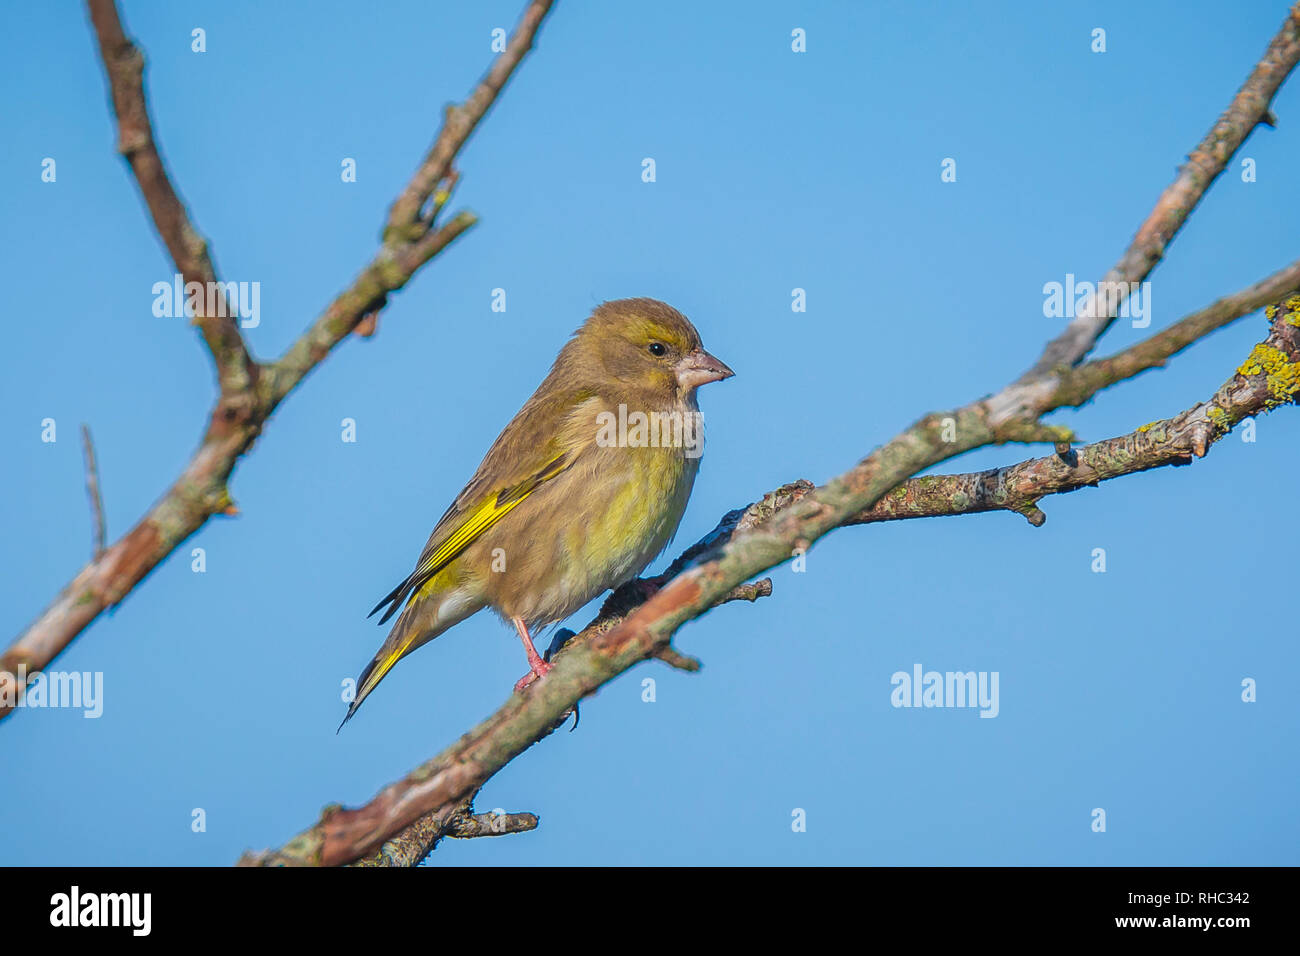 Female European greenfinch (Chloris chloris) bird perched on a branch. Clear blue sky background. Stock Photo